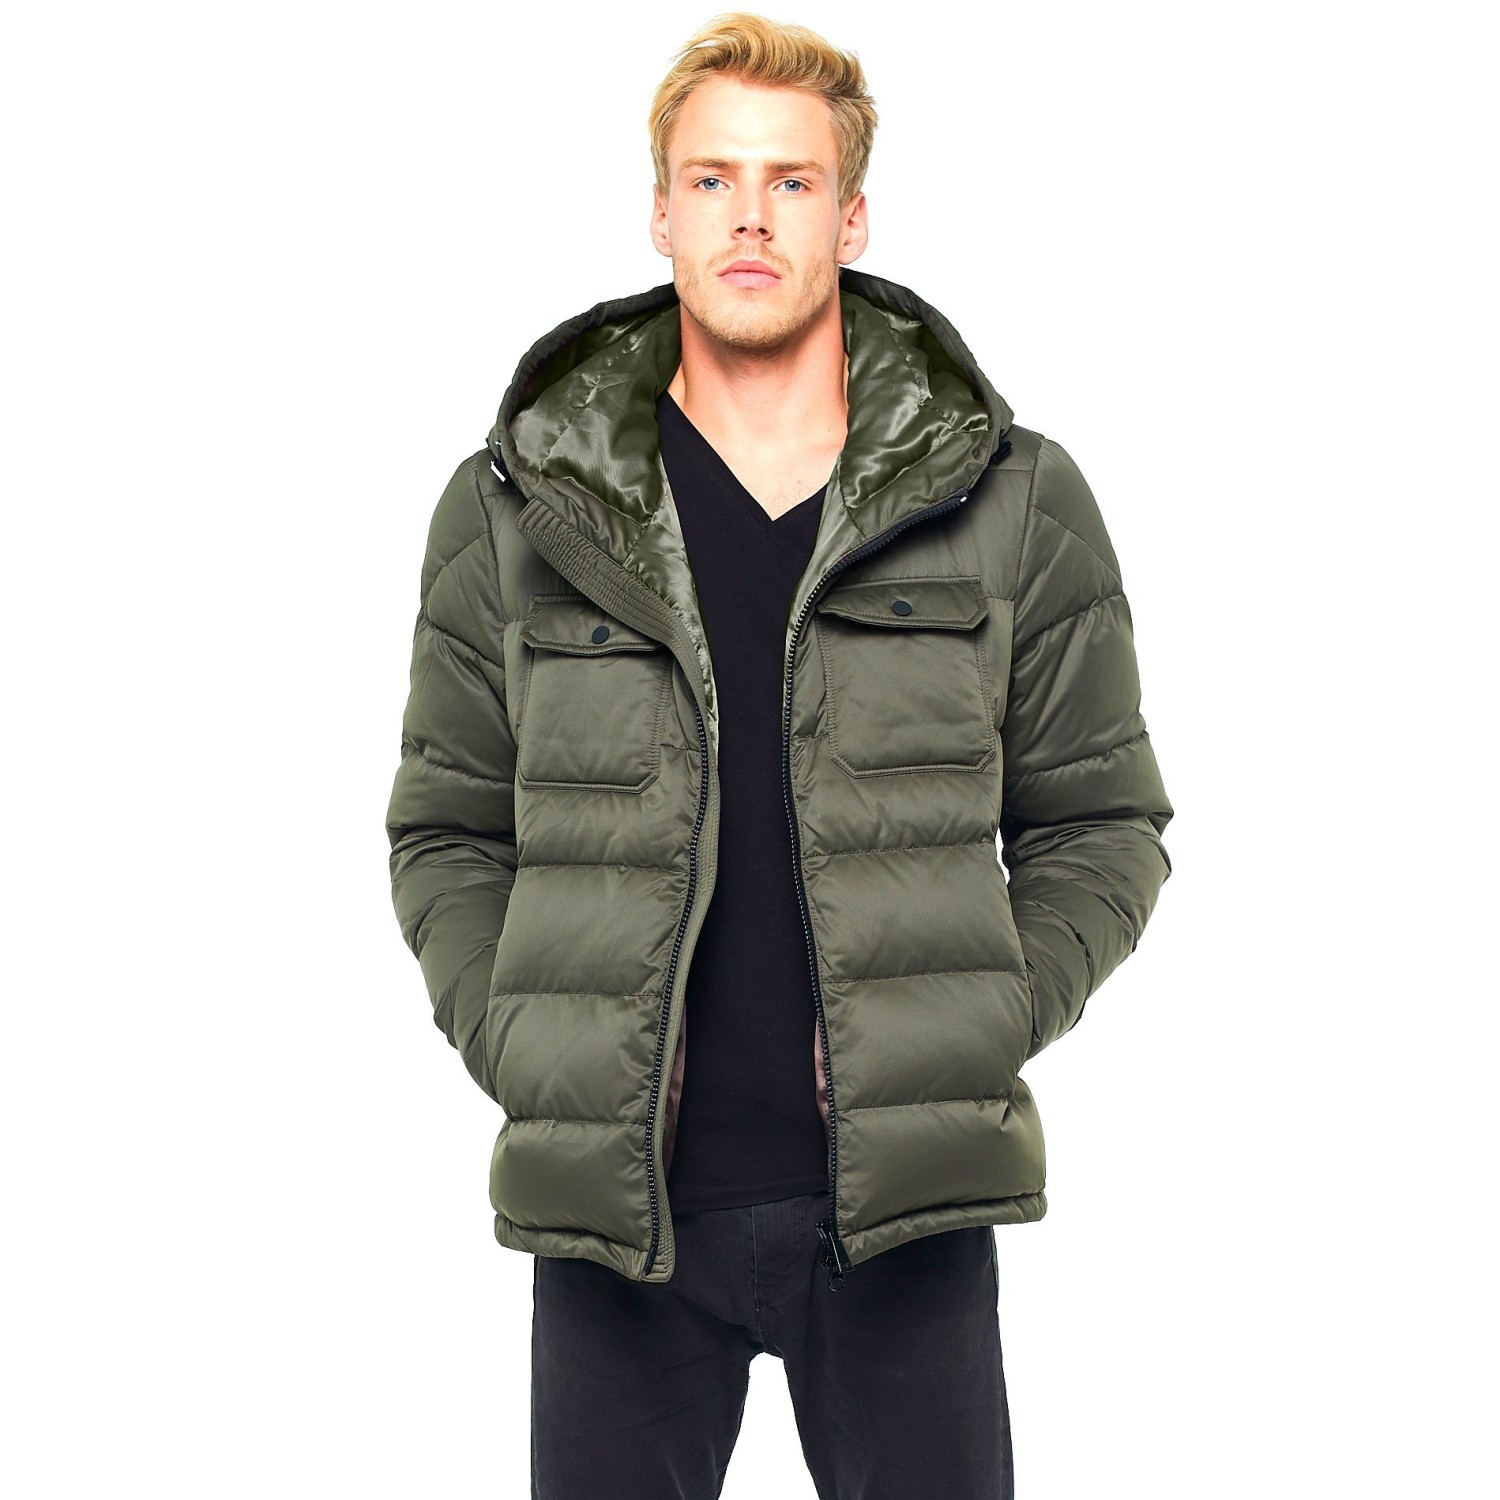 Alalaso Mens Down Jacket Mountain Thicken Lined Fur Hooded Long Parka Padded Coat Thick Solid Fleece Coat jacket 